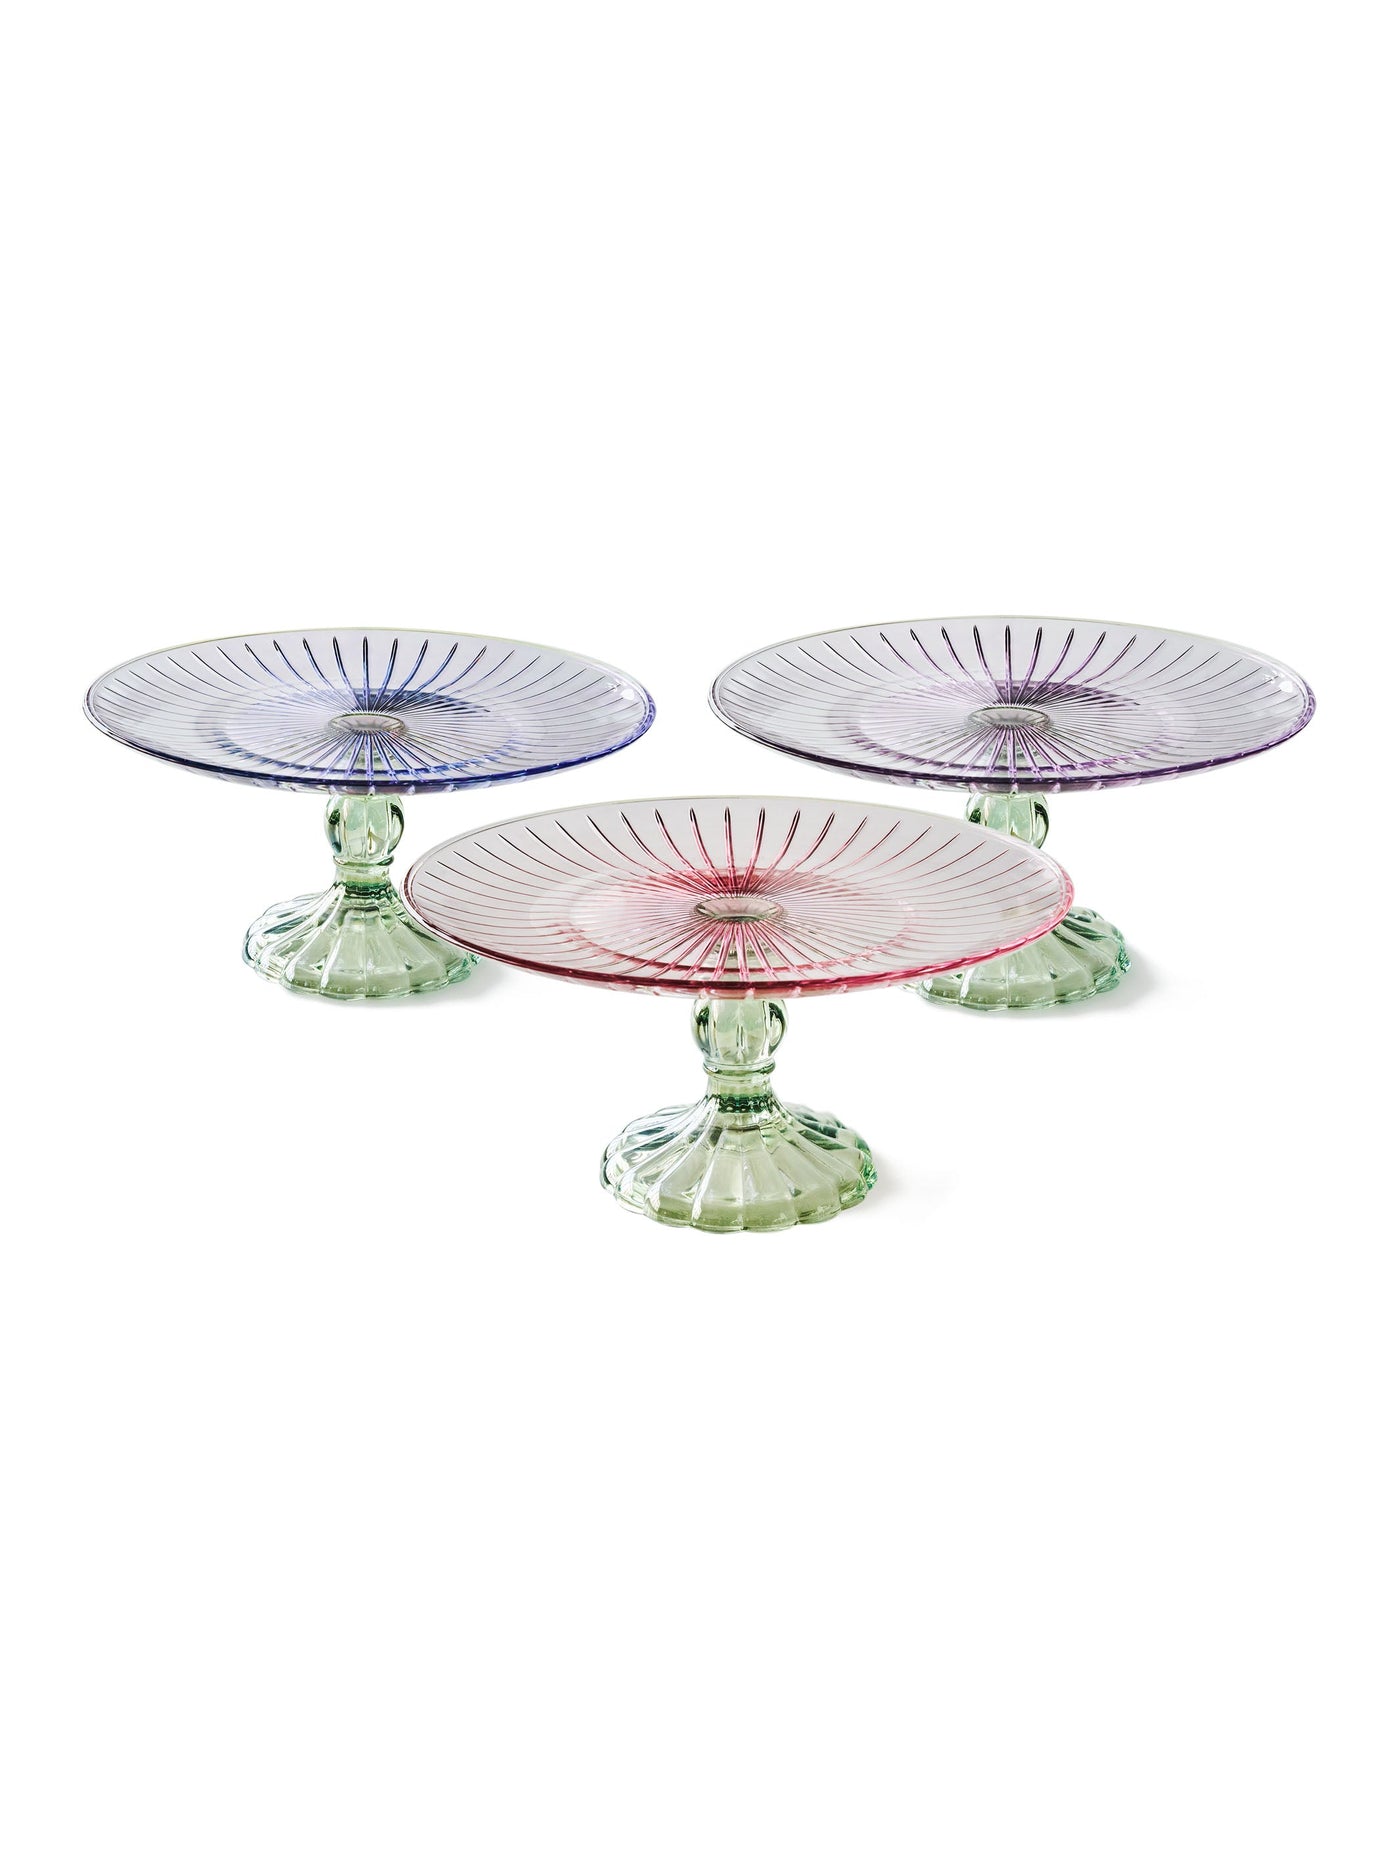 Prestige Cake Stand in Violet/Green by Creart